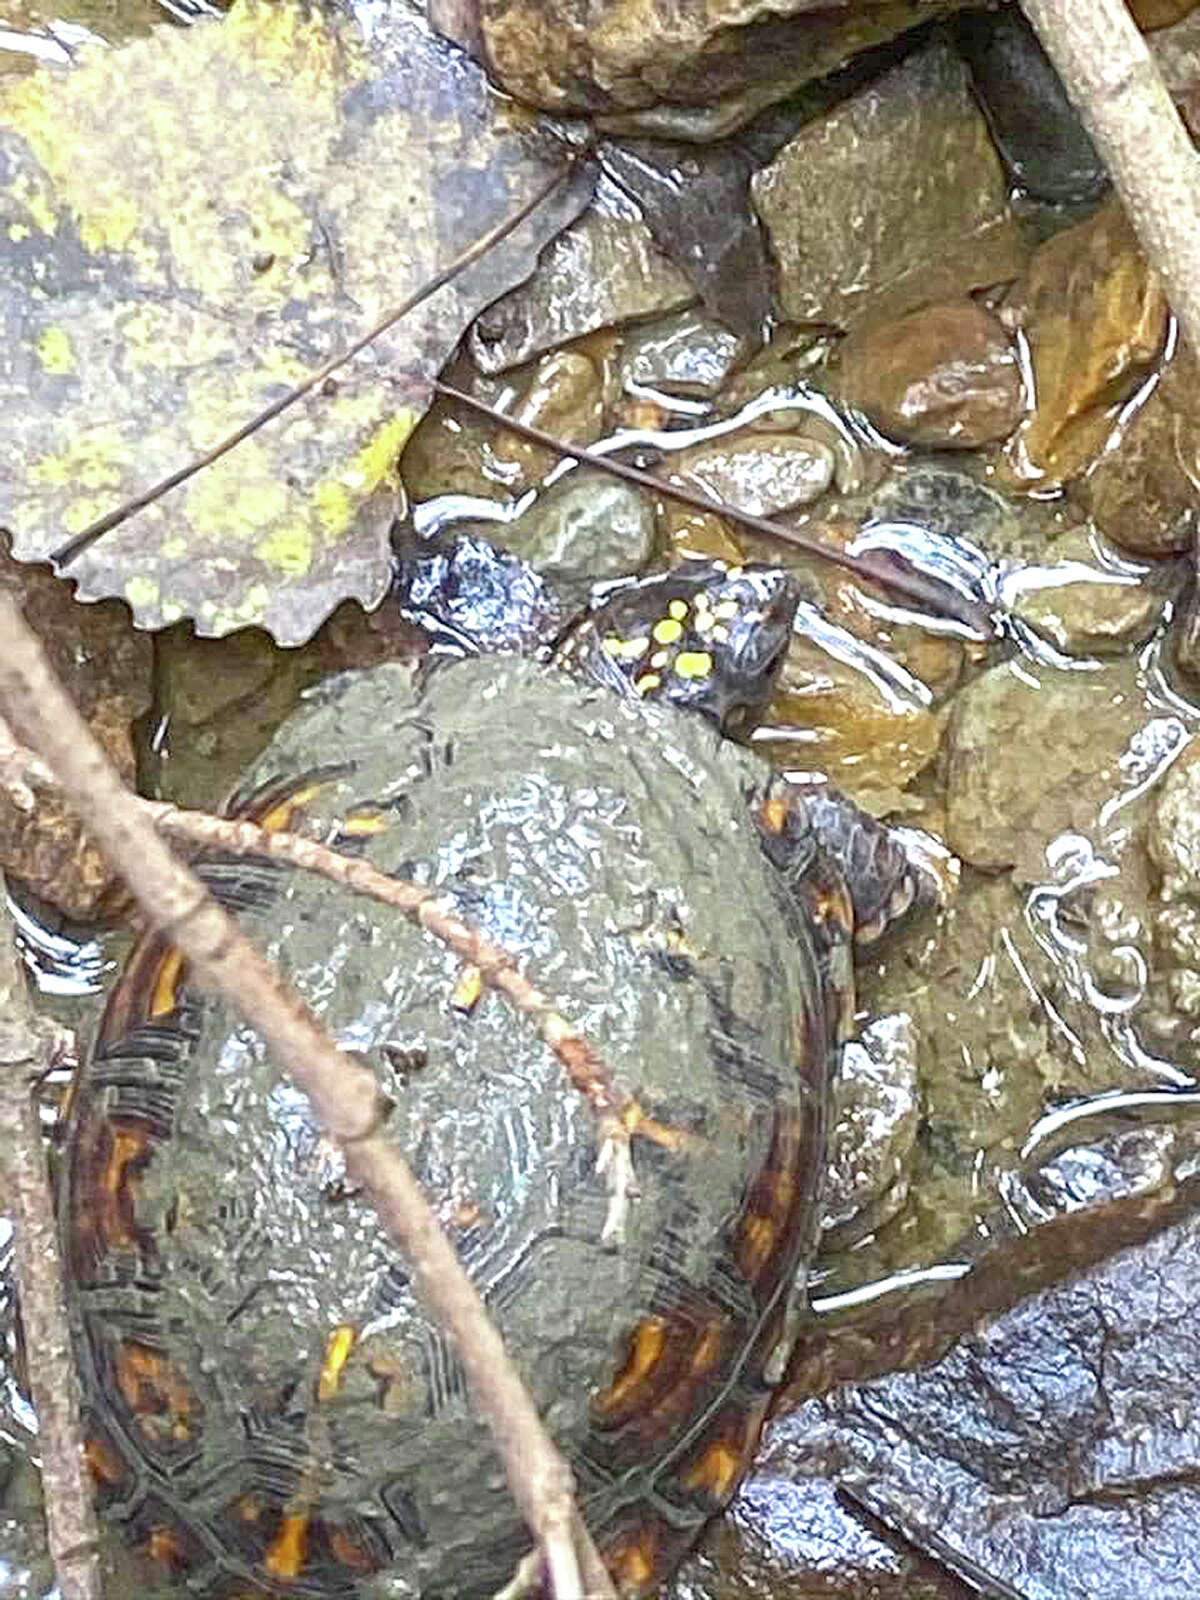 A turtle makes its way through the waters of Birch Creek outside Roodhouse.